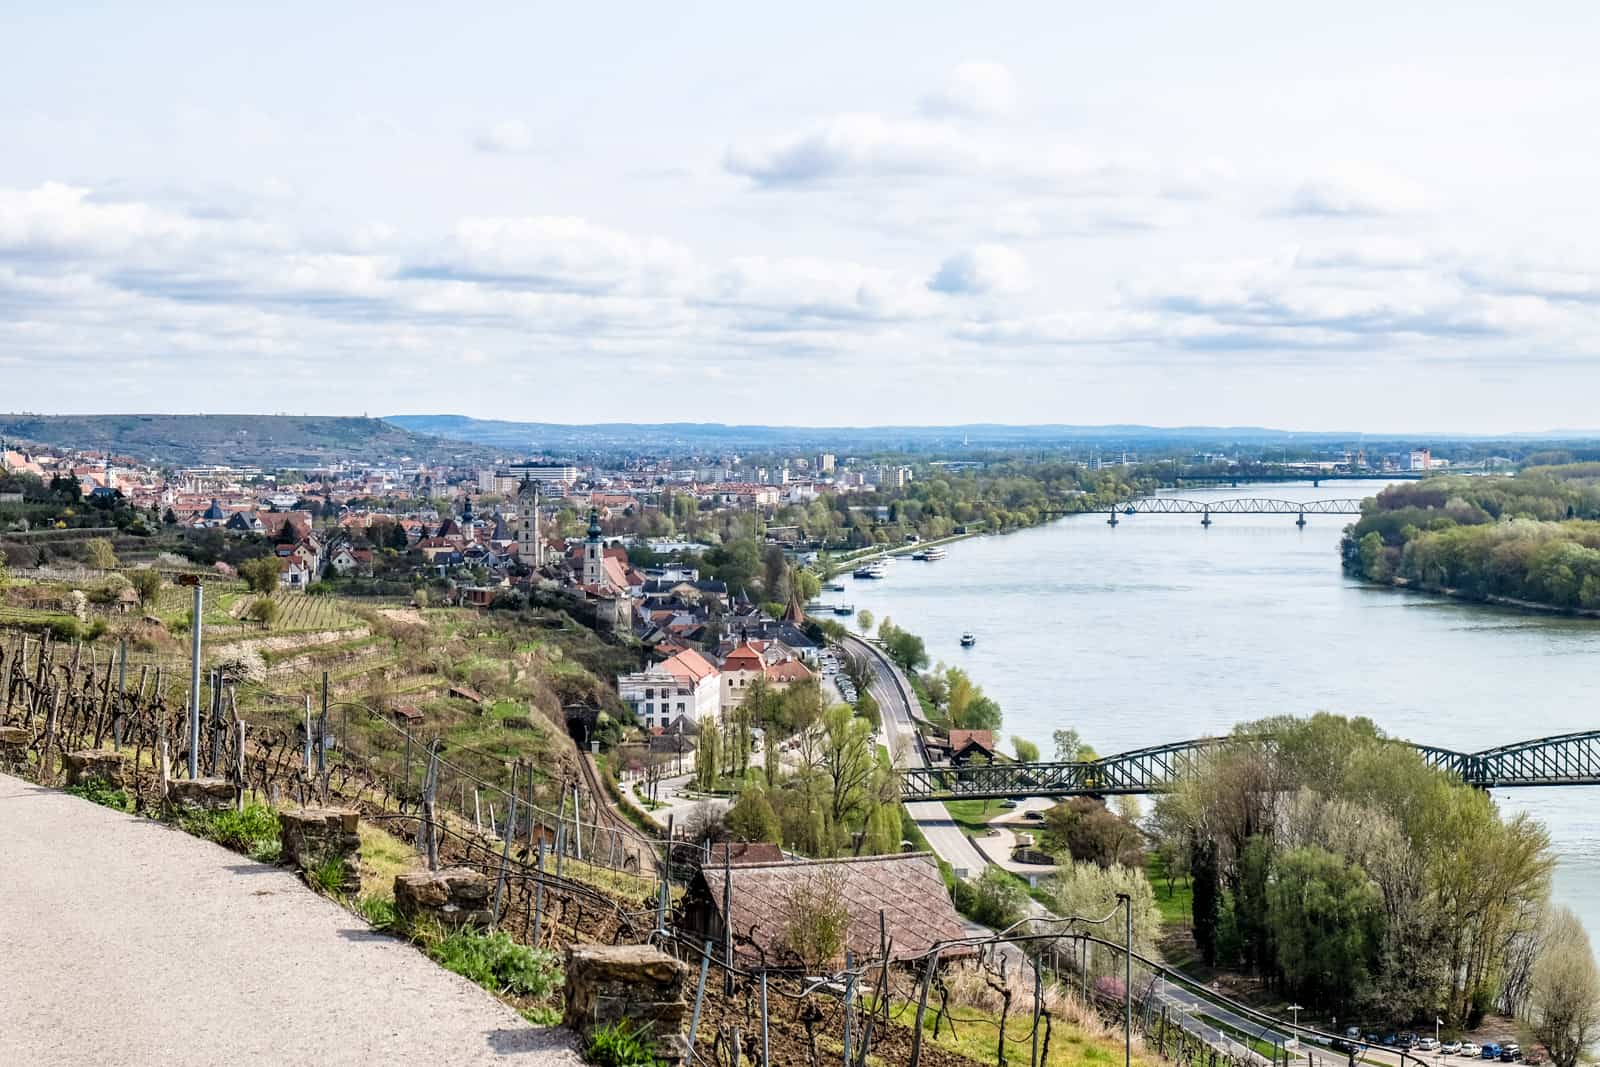 A faraway view from a hiking trail in the Wachau Valley of Krems city on the left and the Danube River on the right